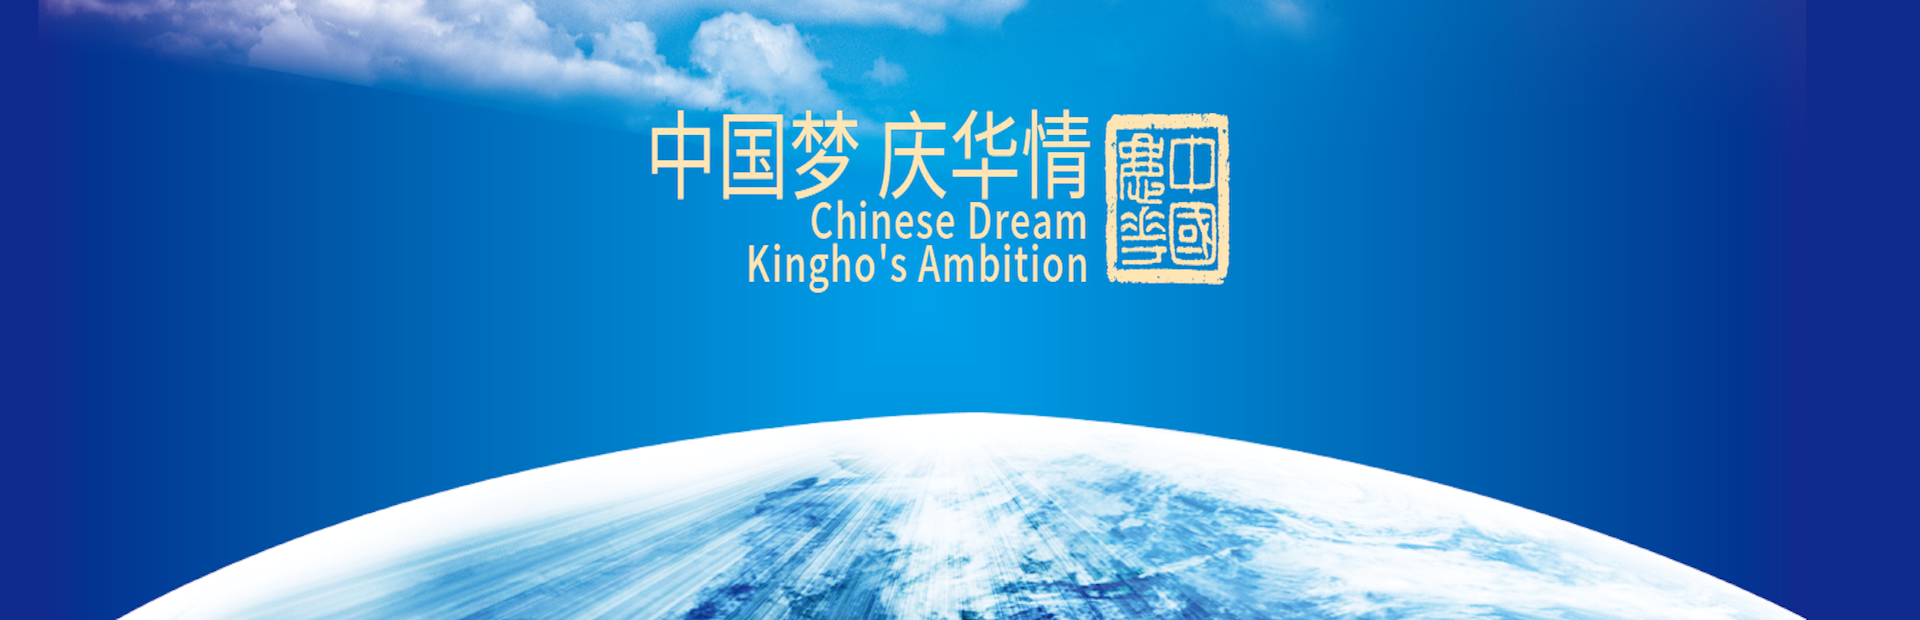 http://www.chinakingho.com/media/images/20230113/20230113130418_3652.png